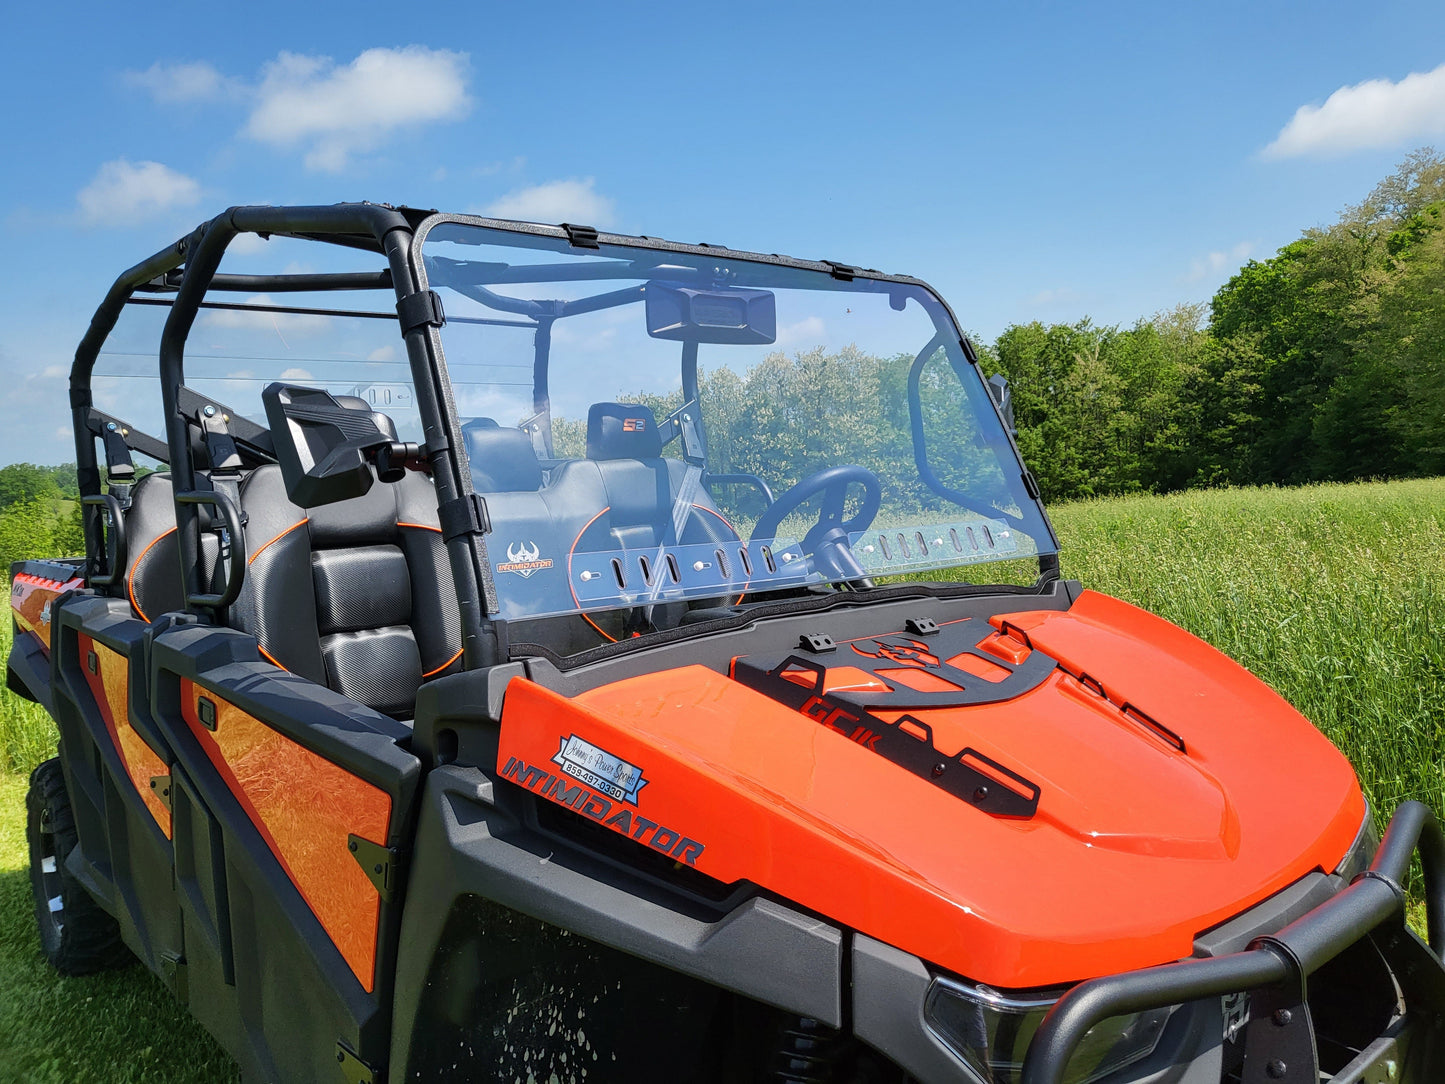 Intimidator GC1K 6-Seater - 2 Pc Windshield with Optional Vents-Clamps-Hard Coat - 3 Star UTV